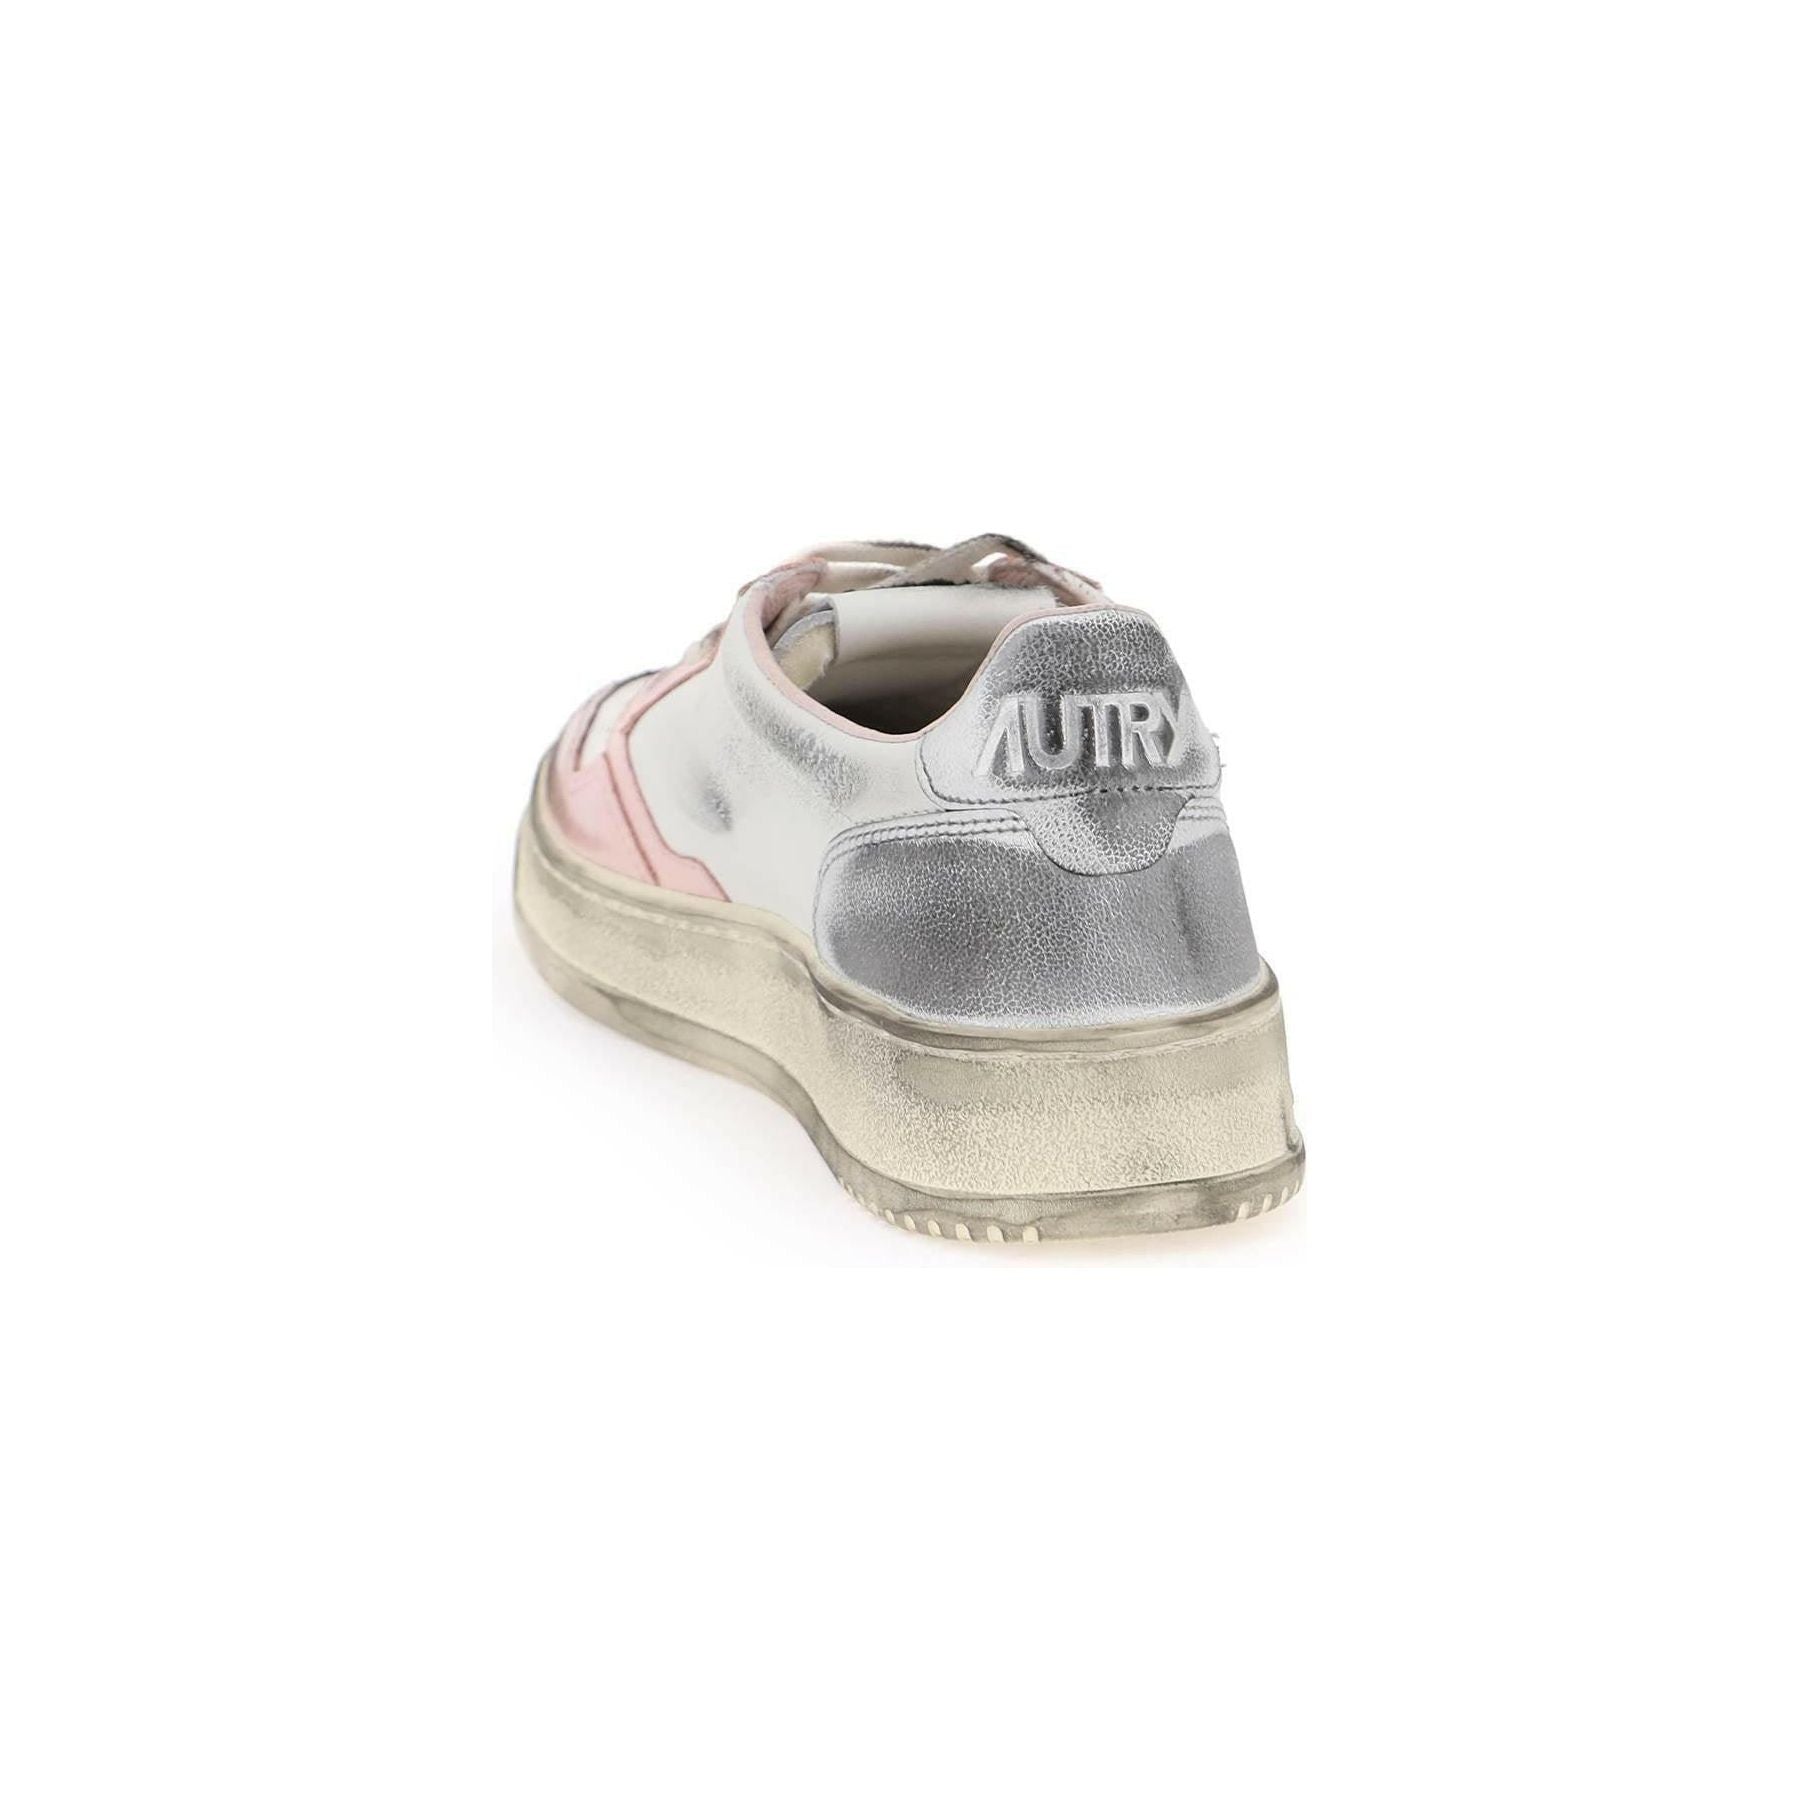 White Pink and Silver Medalist Low Super Vintage Sneakers AUTRY JOHN JULIA.